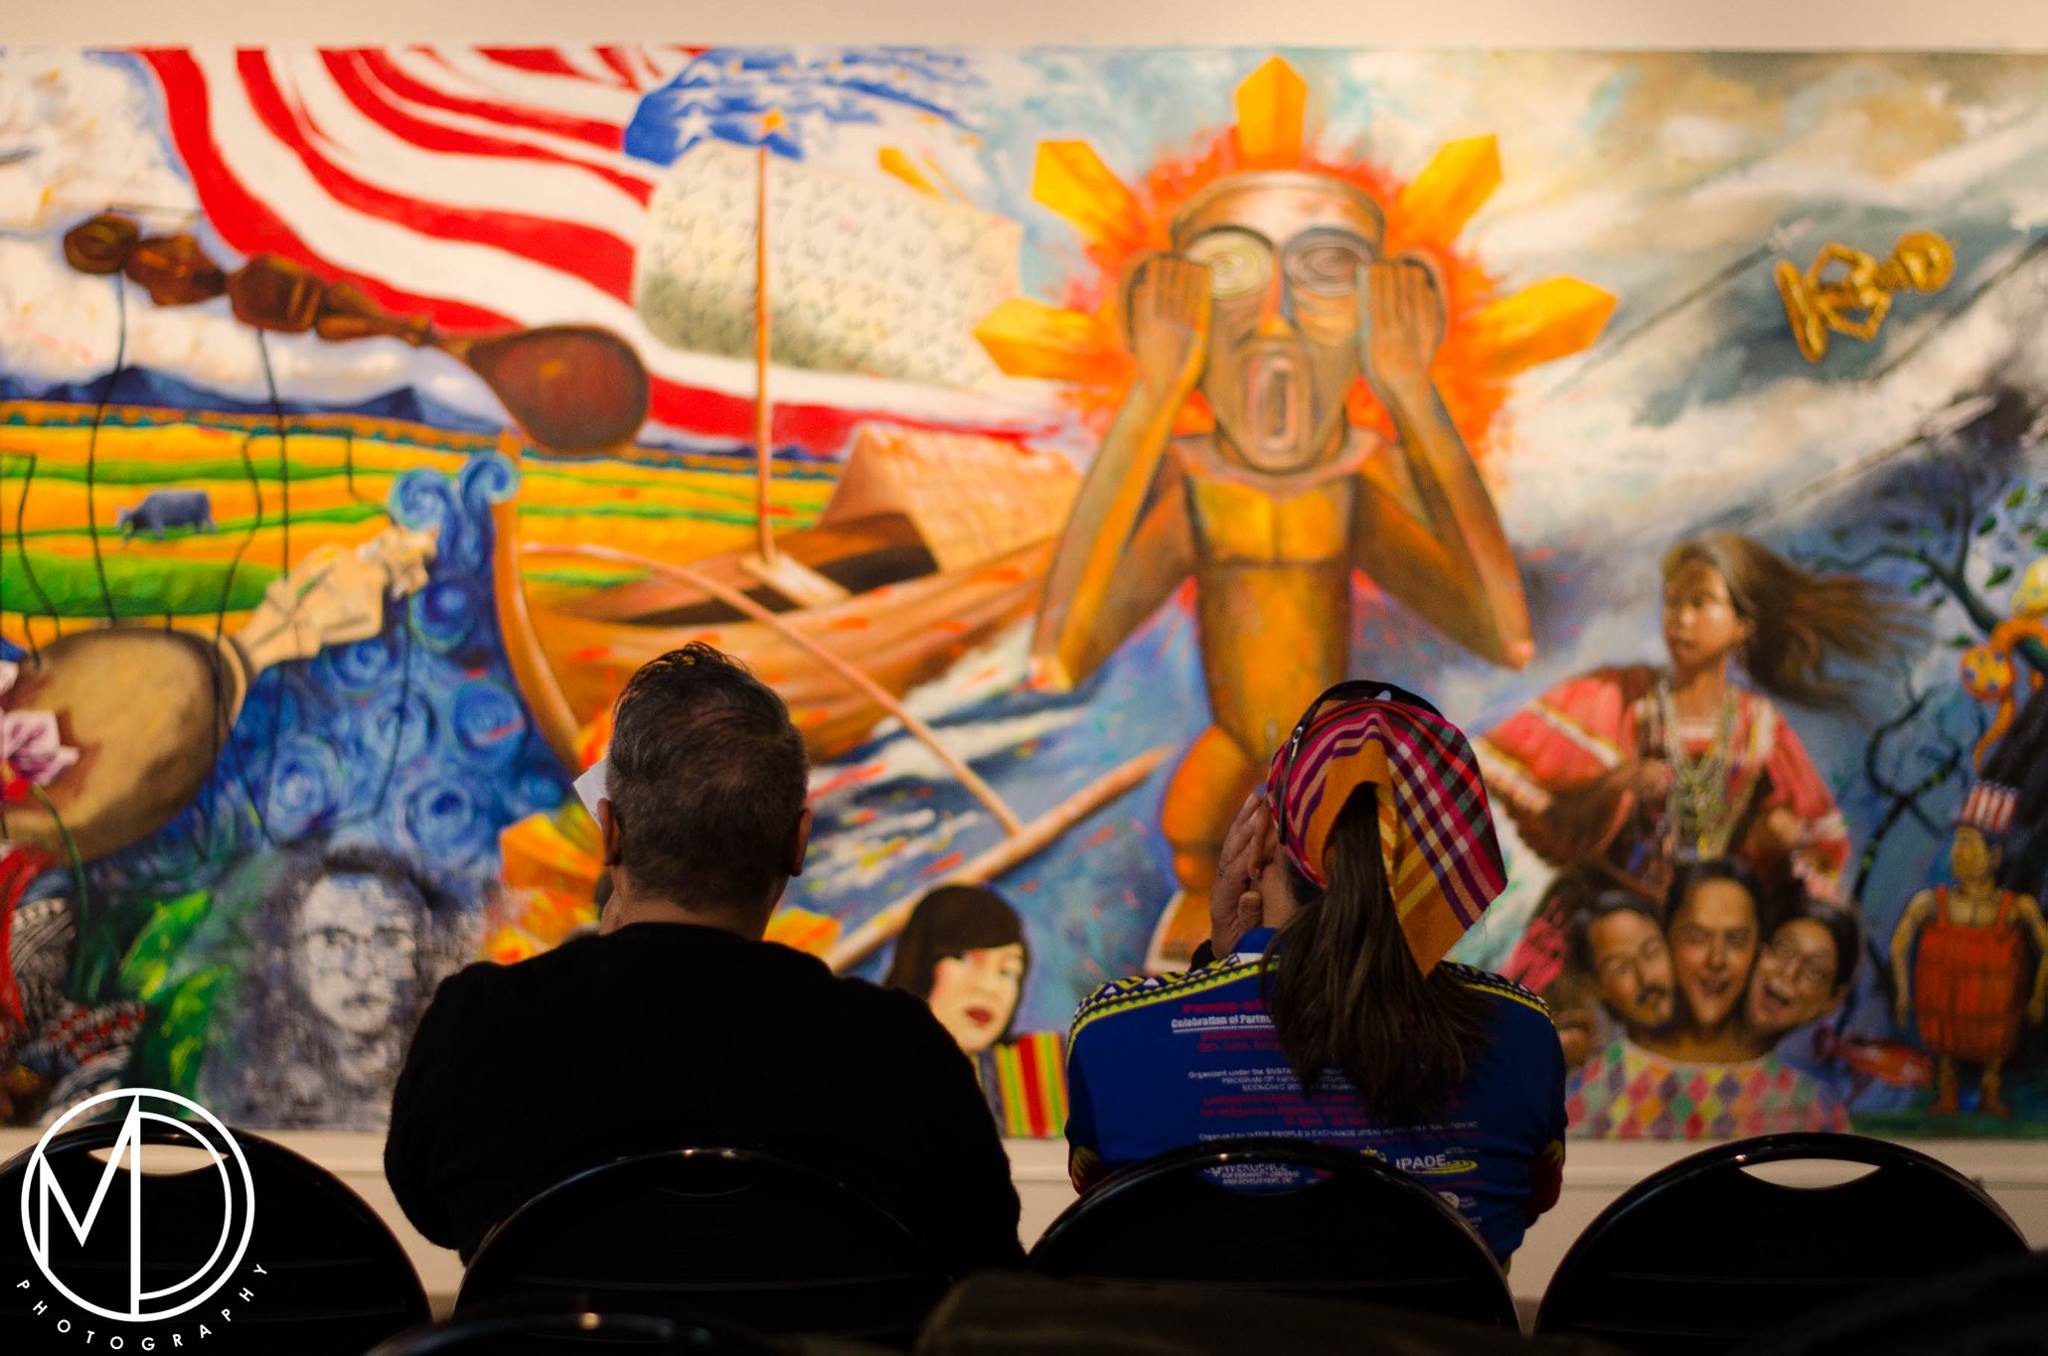 Guests Cesar Conde and Levi Aliposa viewing the Art and Anthropology collaborative mural. (c) Field Museum of Natural History - CC BY-NC 4.0